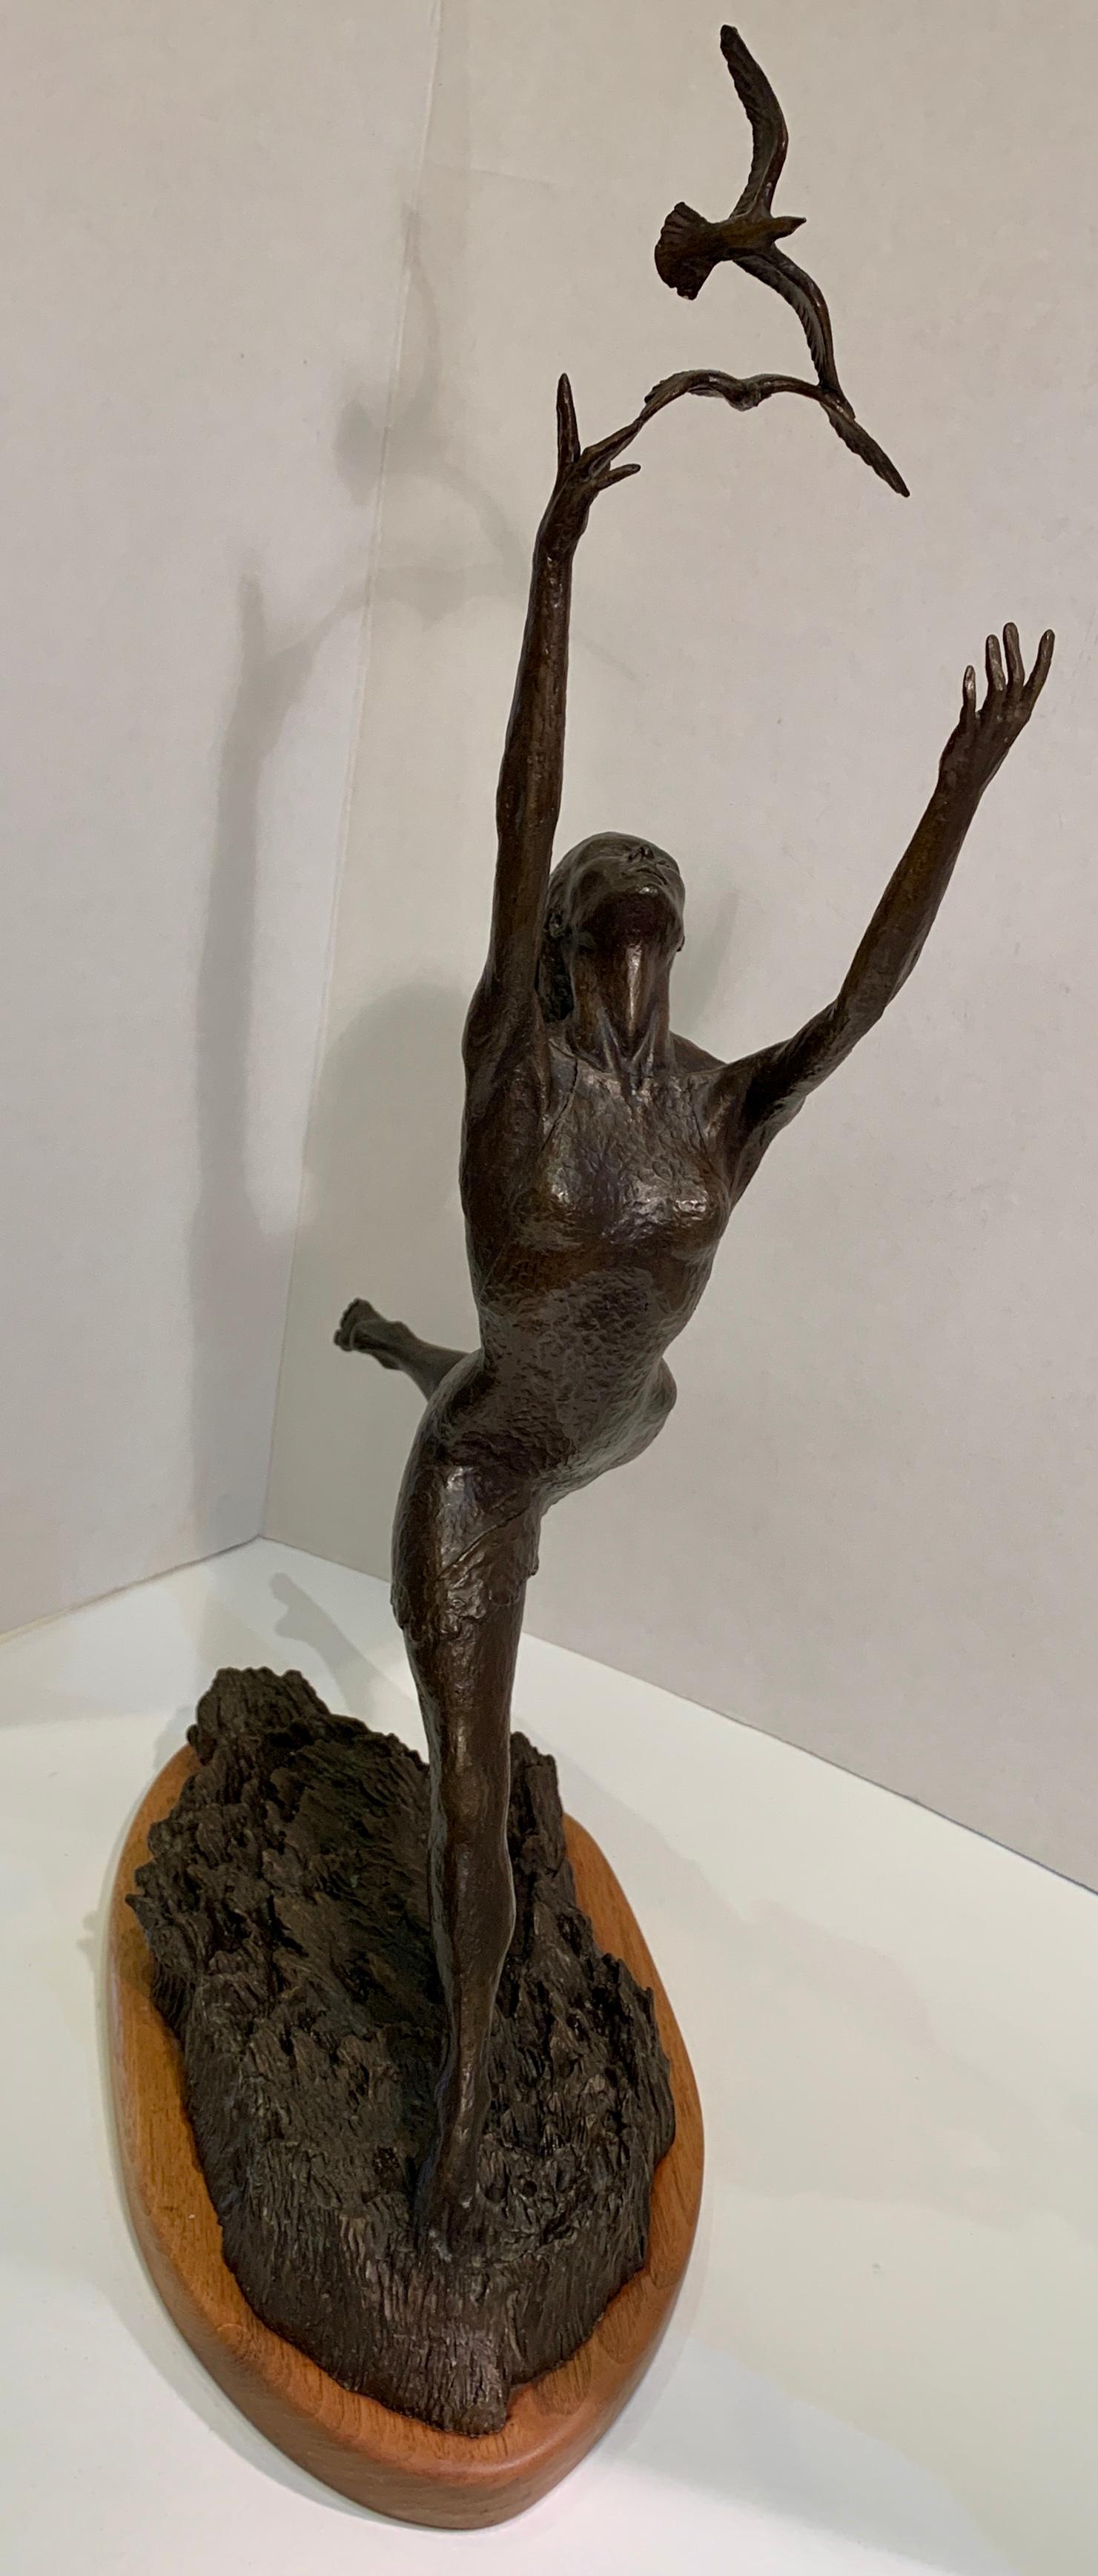 Art Deco Style Bronze Sculpture of a Woman Reaching for Seagulls by M. Young 2